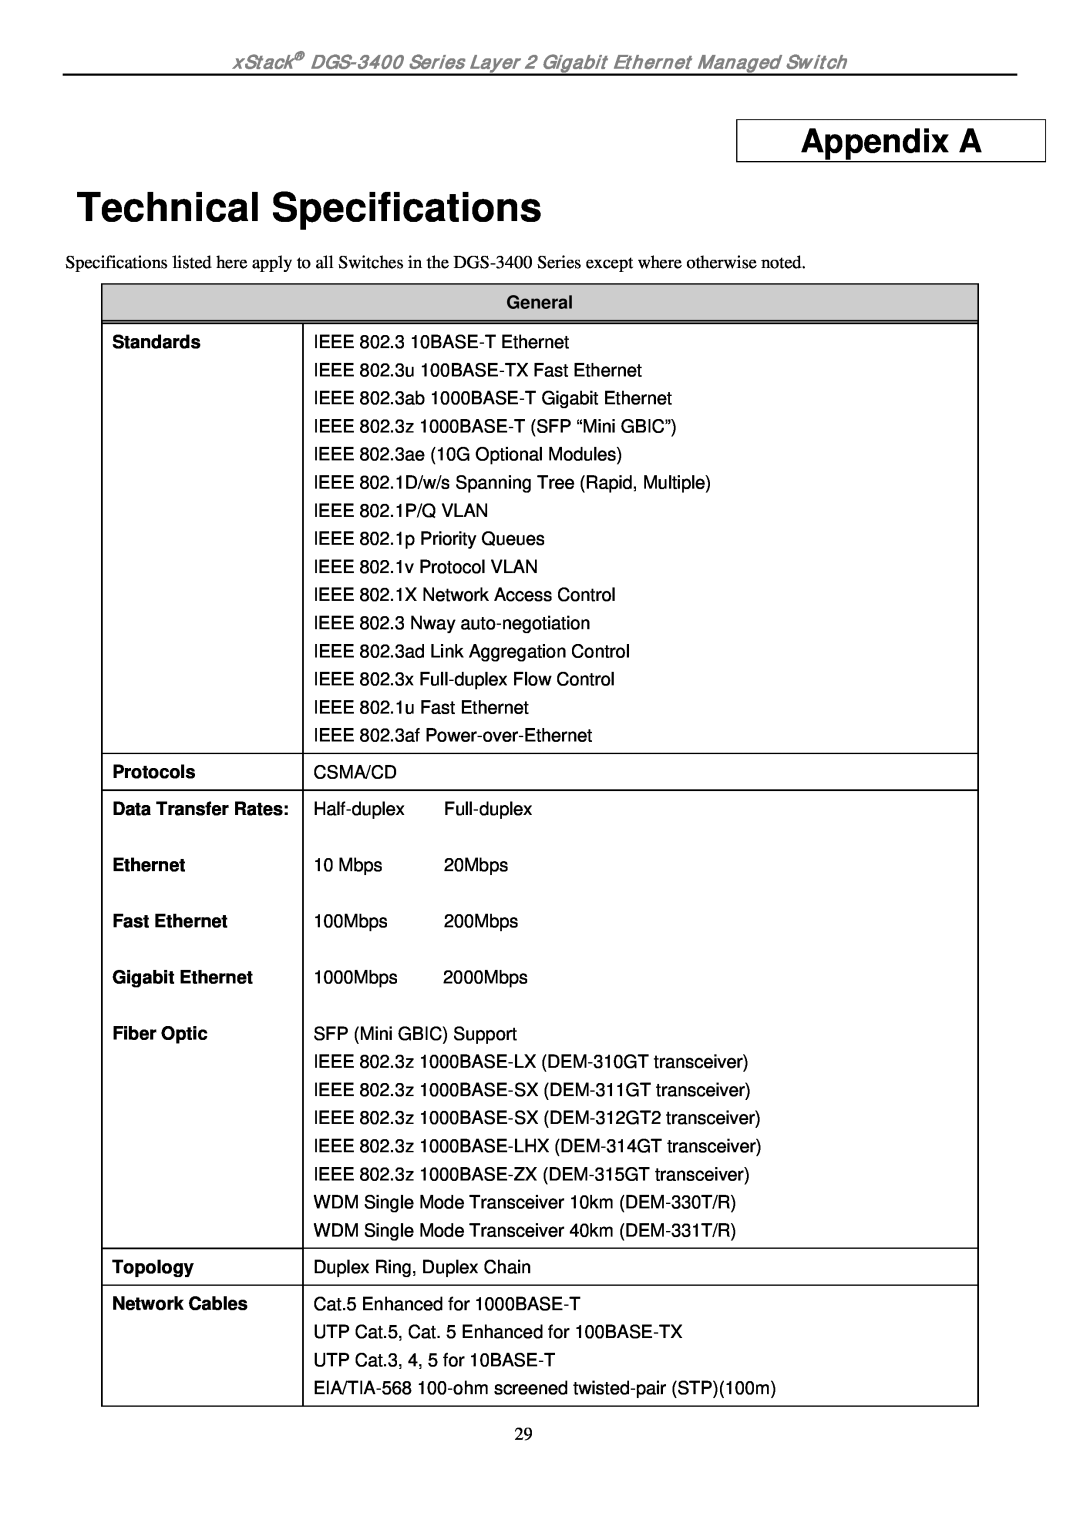 D-Link ethernet managed switch manual Technical Specifications, Appendix A 